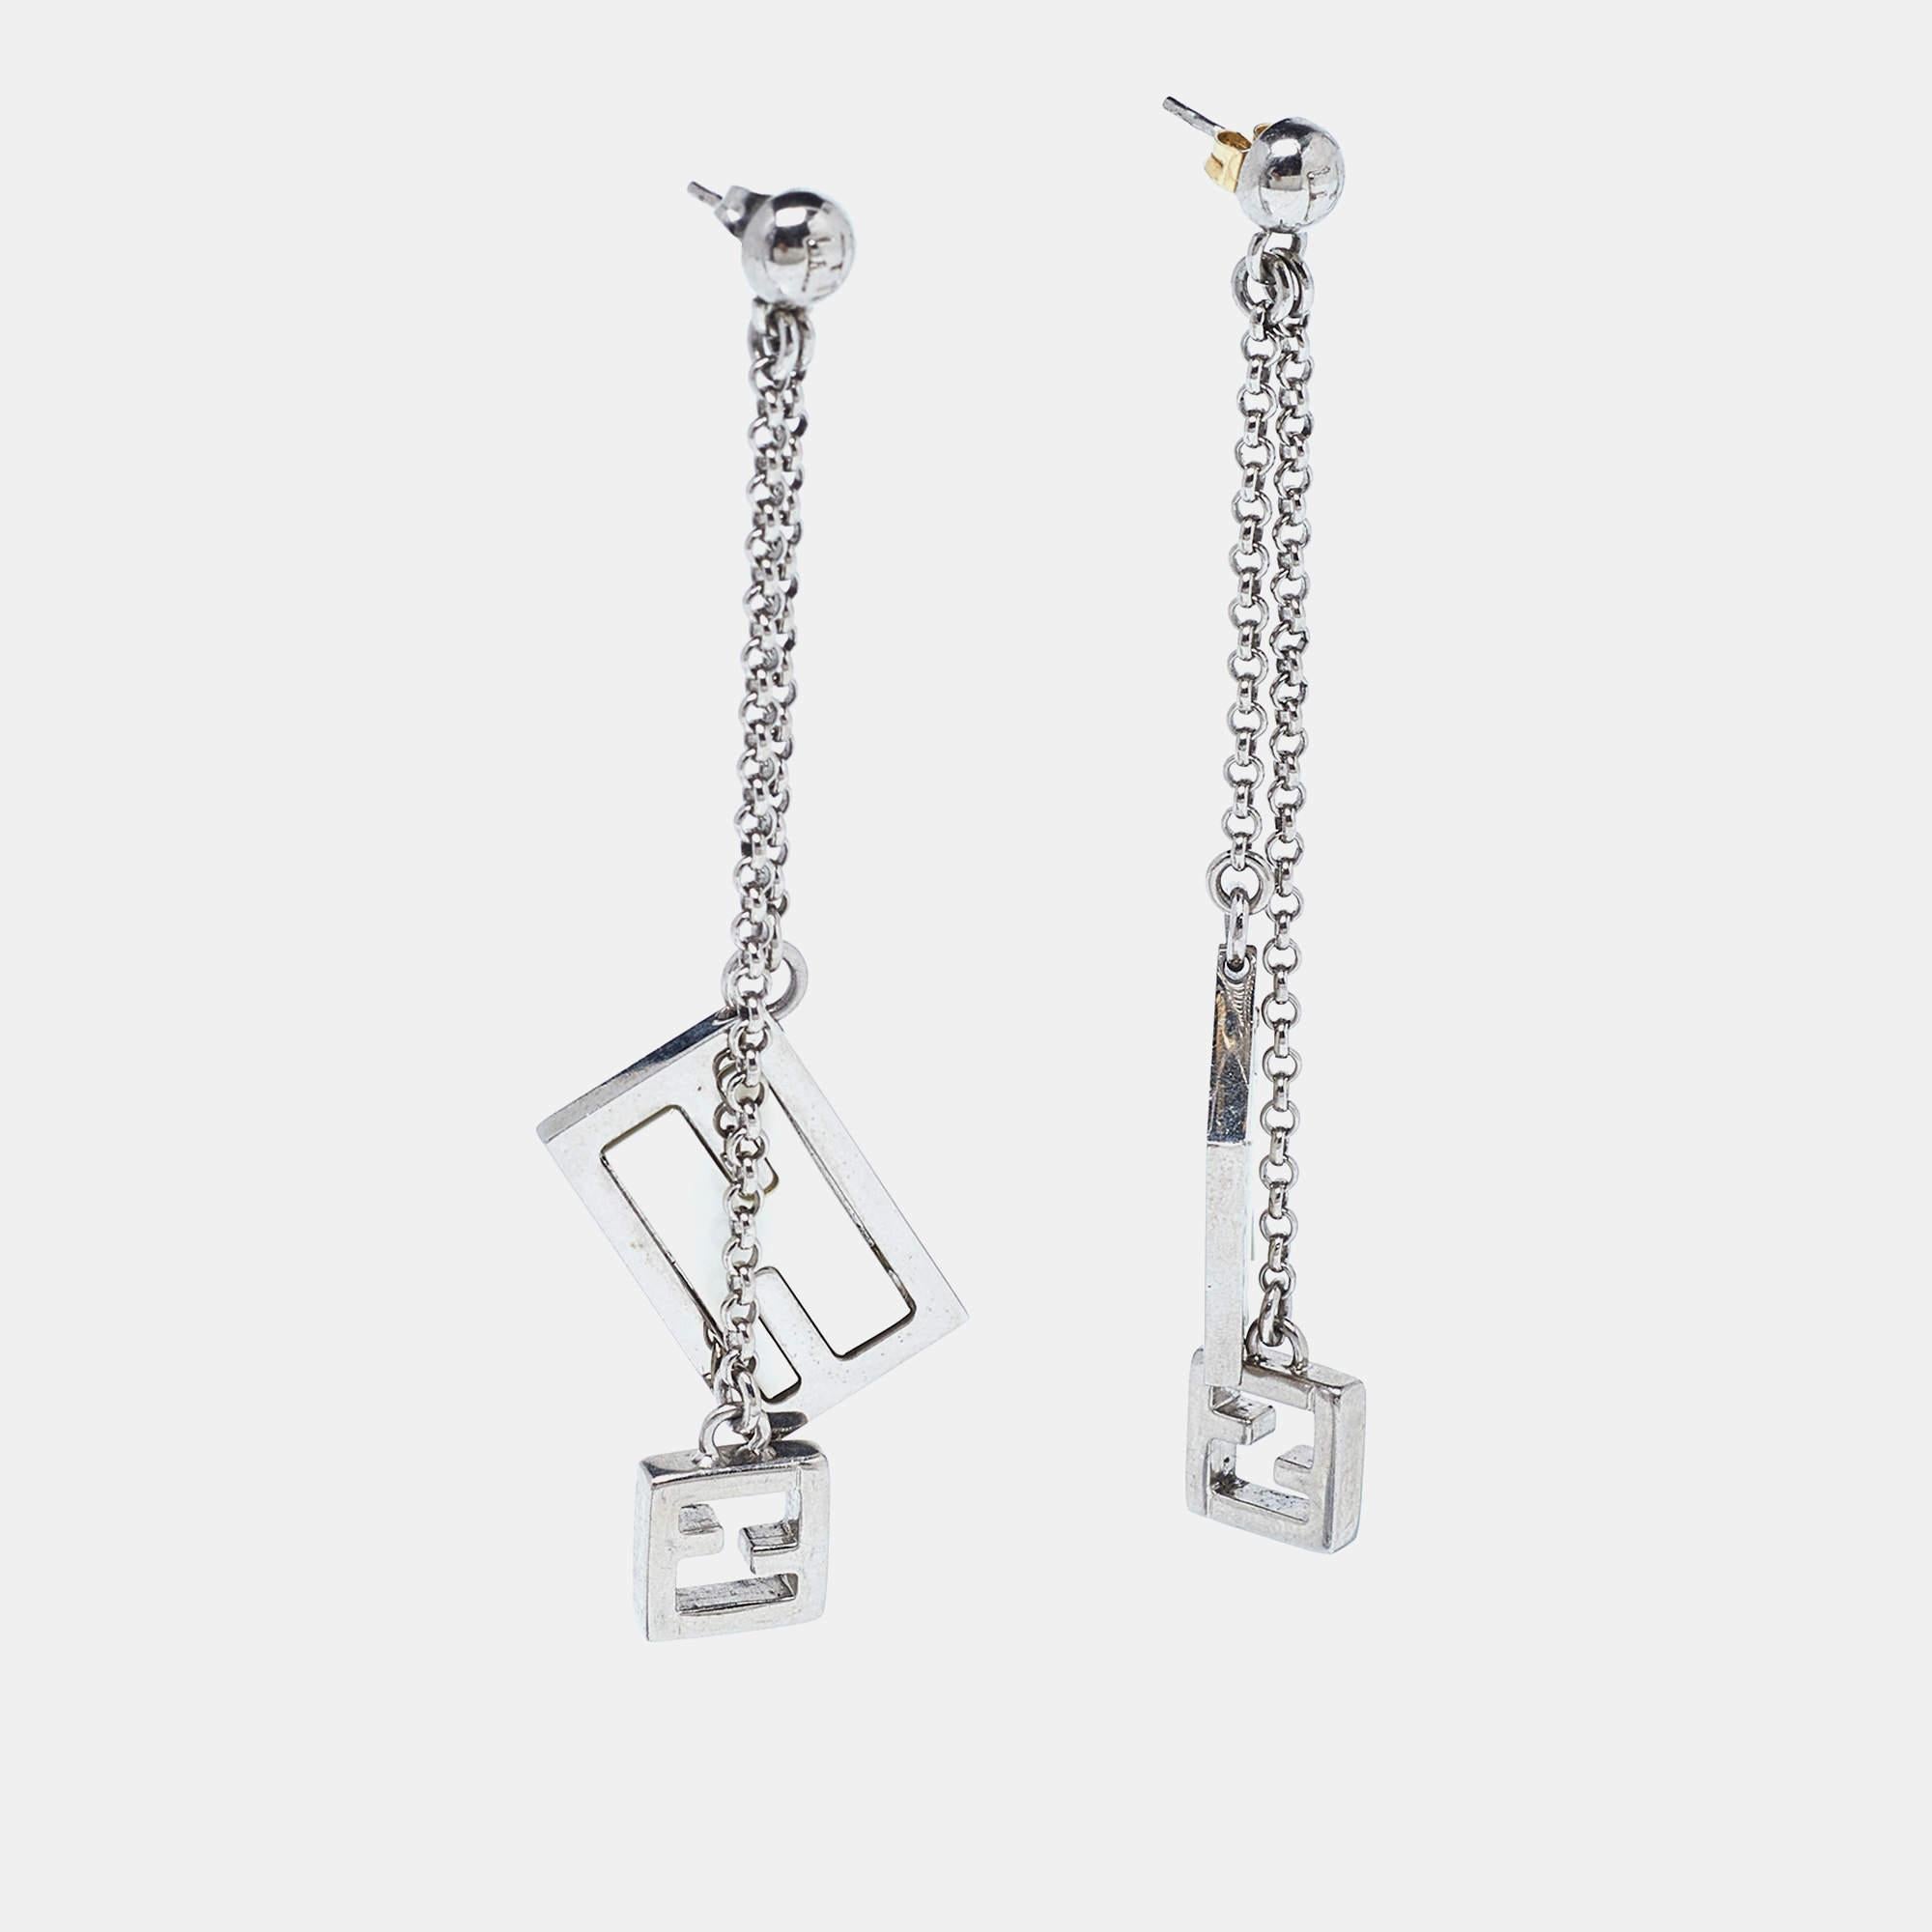 Easy to wear, beautiful, and stylish, these Fendi earrings are perfect to wear with your casual everyday edit as well as party looks. Constructed in silver-tone metal, this pair is added with brand details for a signature slant.

Includes: Original